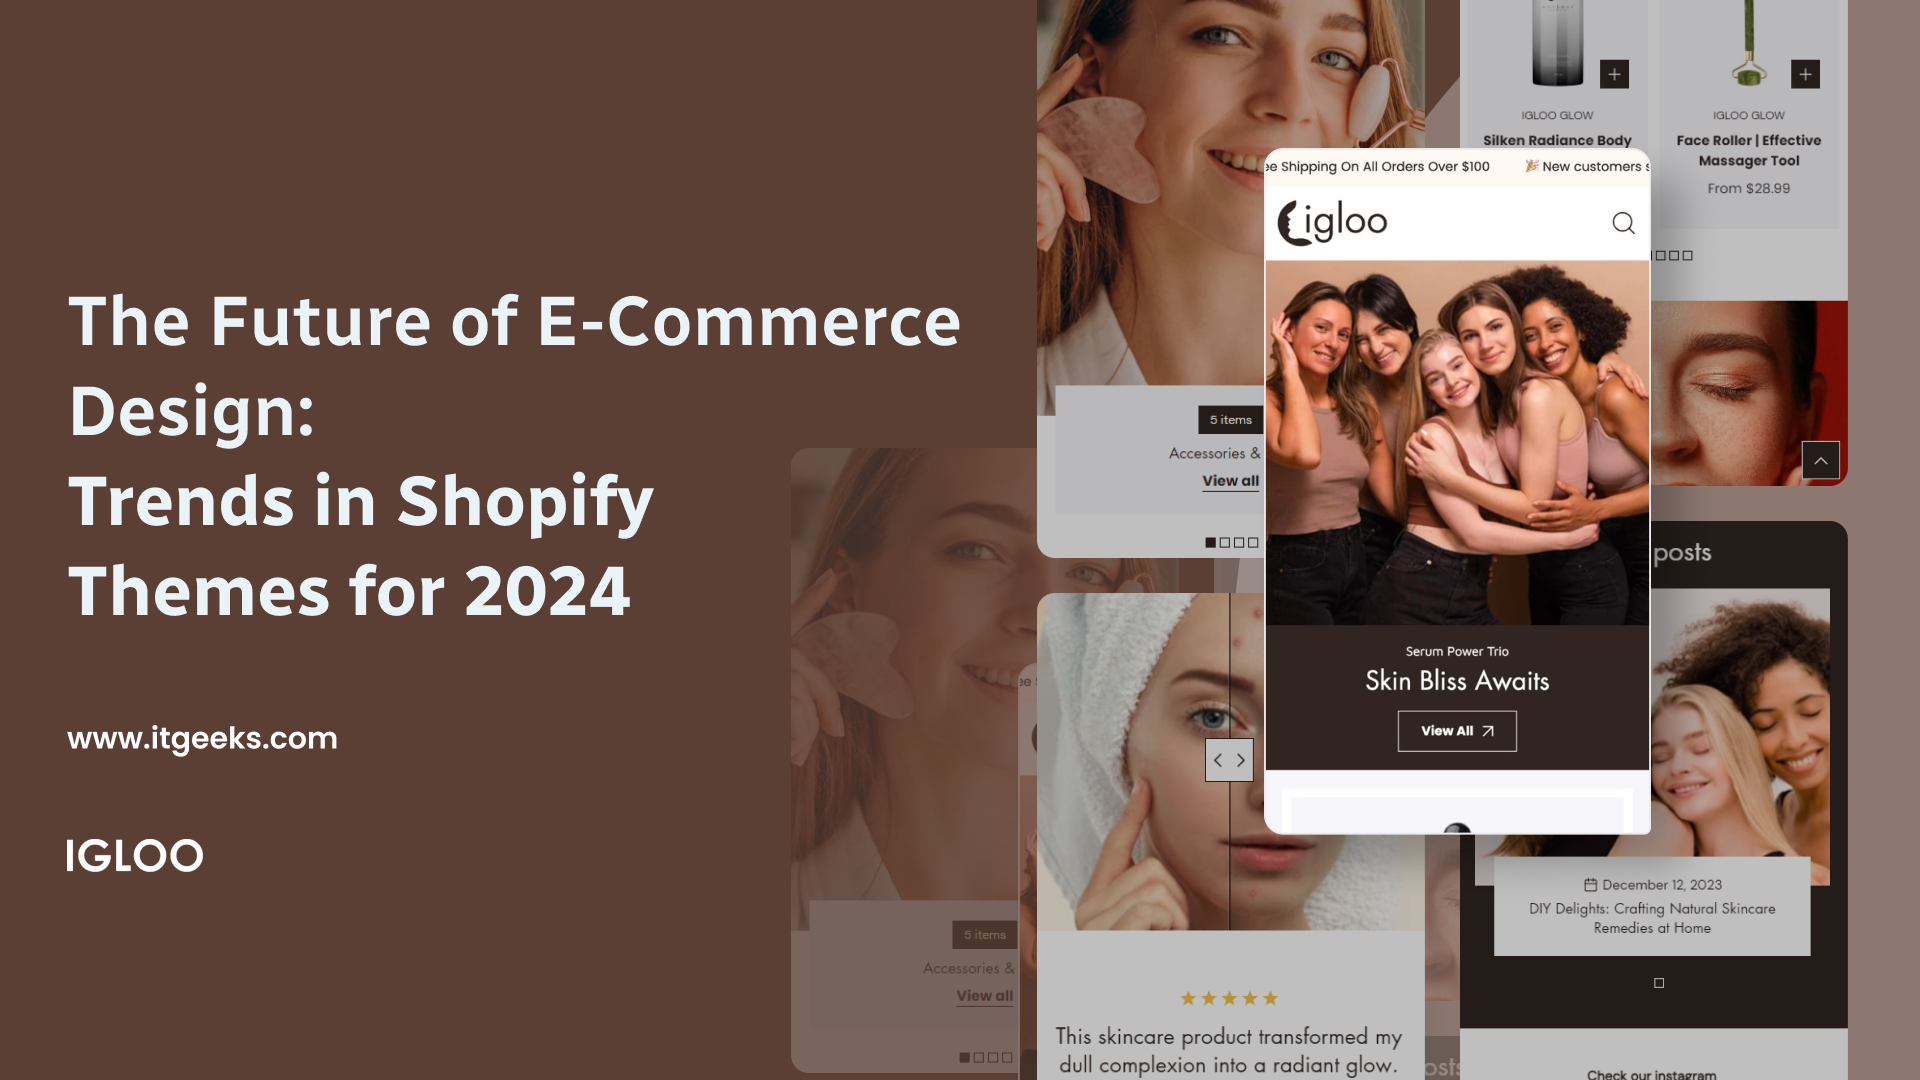 The Future of E-Commerce Design Trends in Shopify Themes for 2024